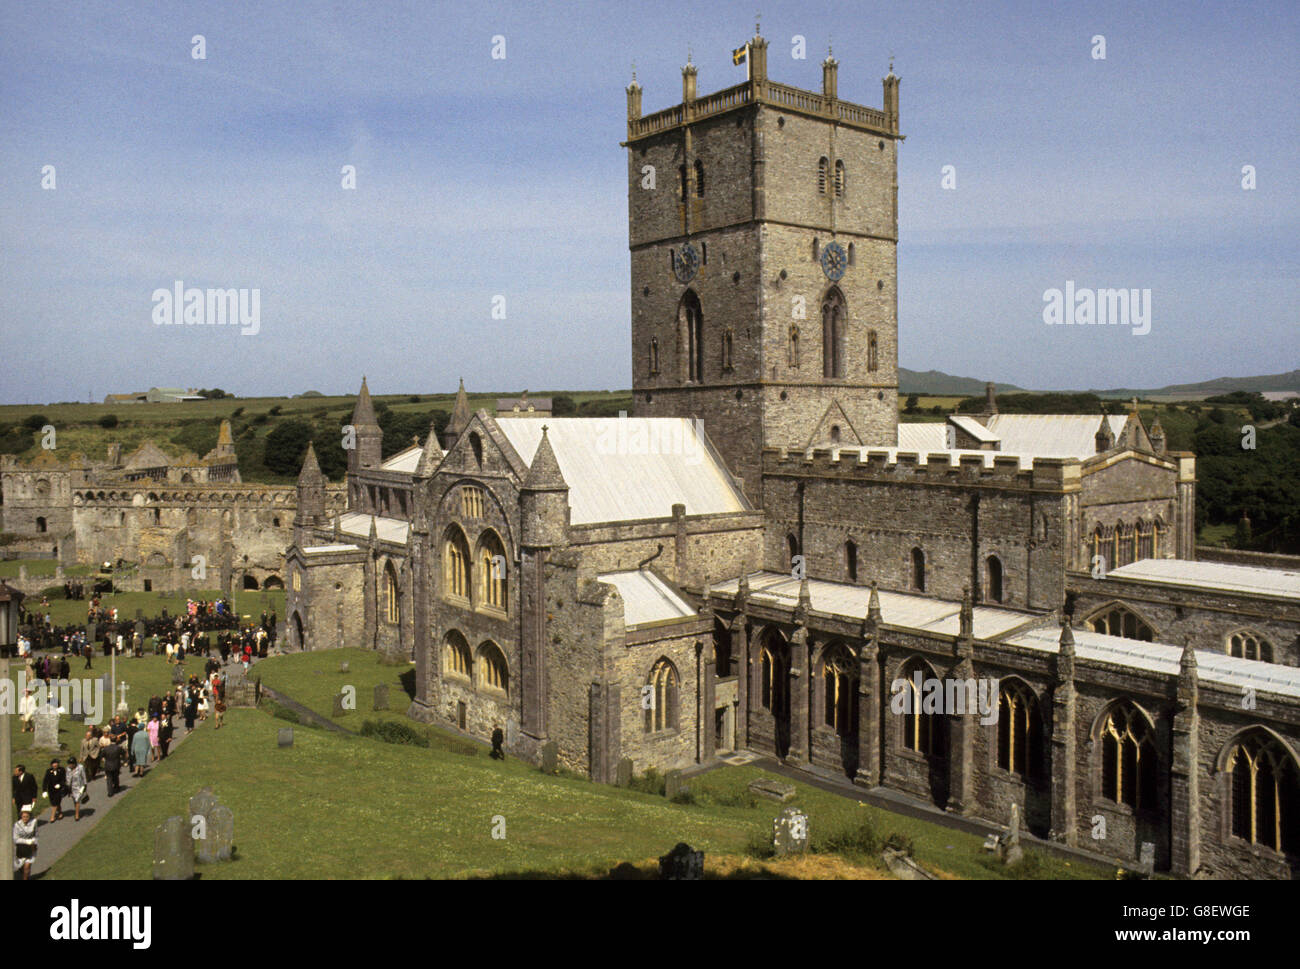 St. David's Cathedral in Wales, busy with people as the Prince of Wales visits on his tour. Stock Photo